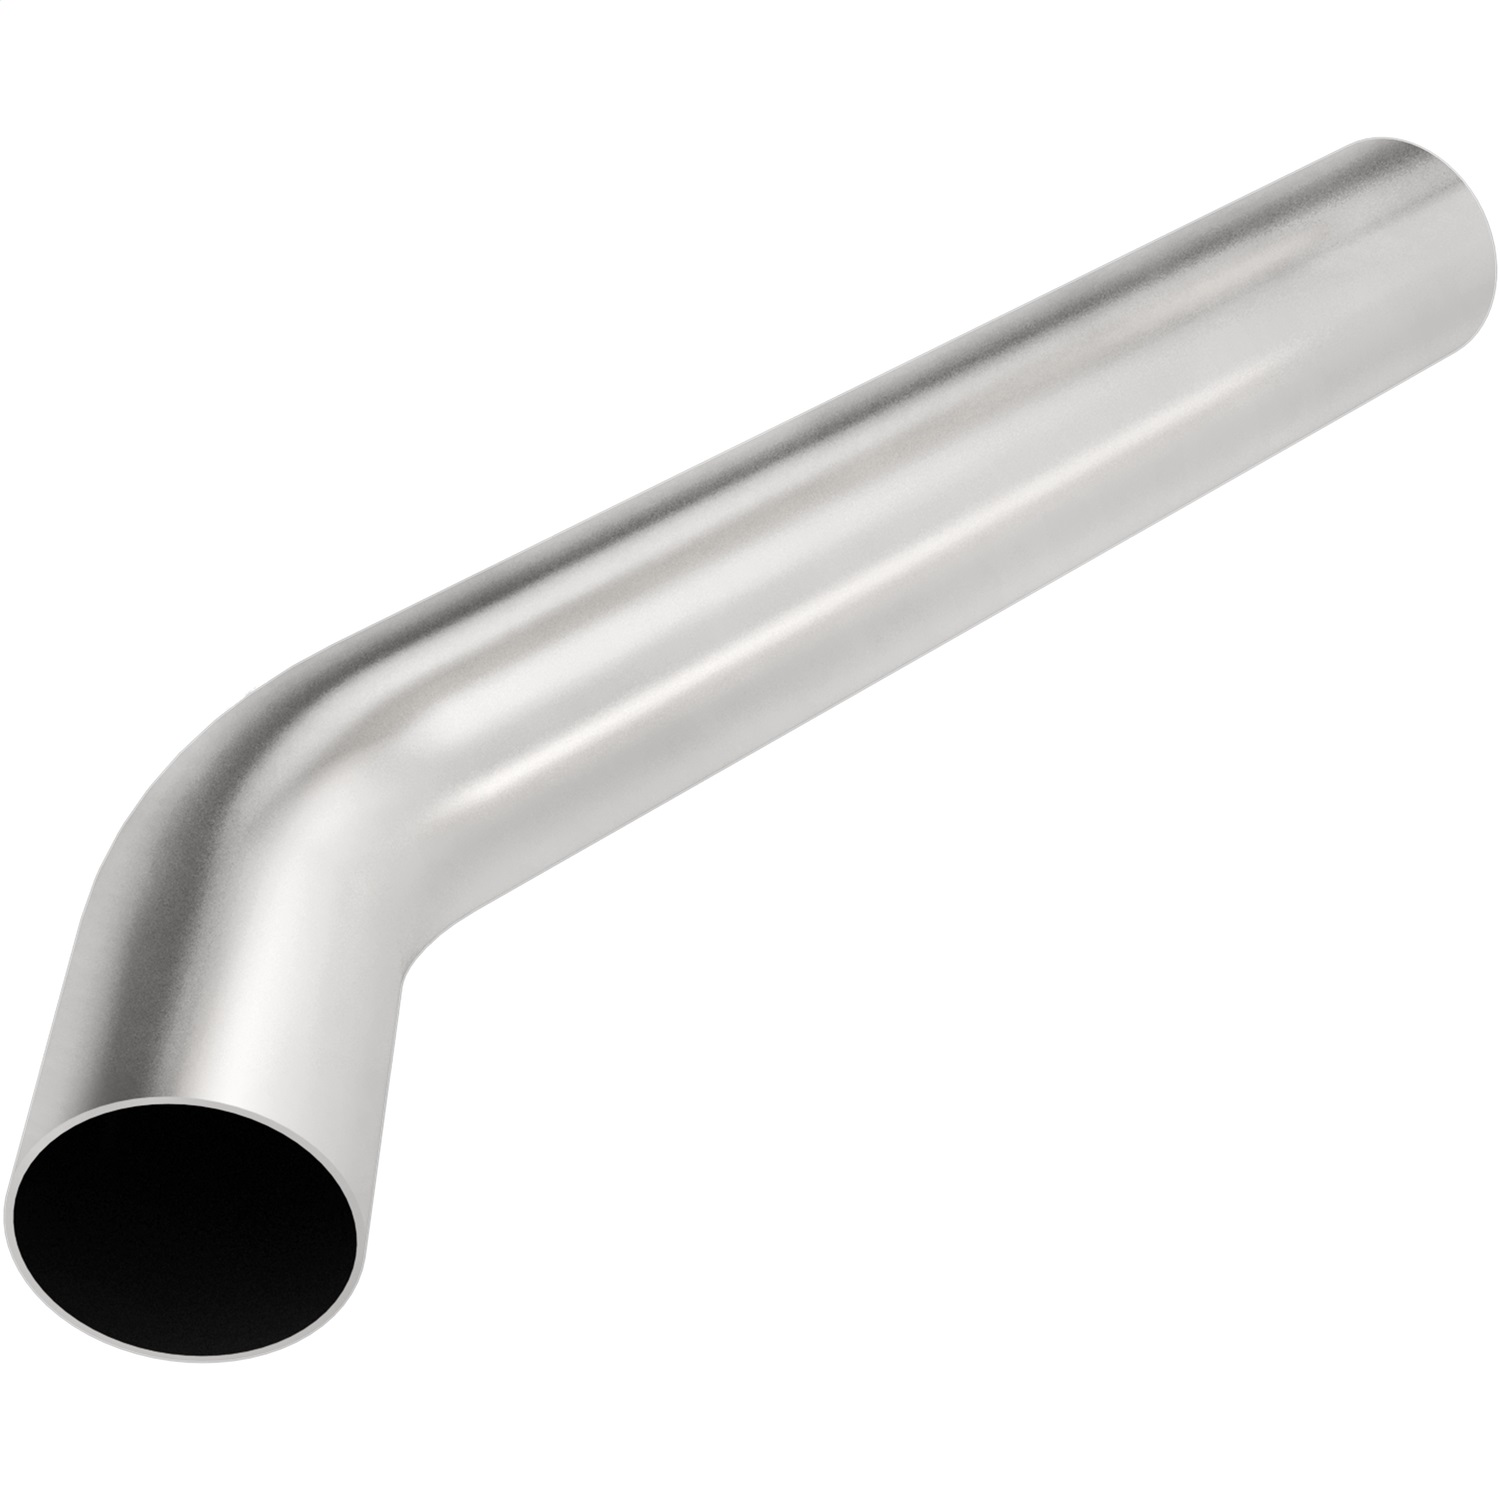 Magnaflow Performance Exhaust Magnaflow Performance Exhaust 10739 Smooth Transitions Exhaust Pipe